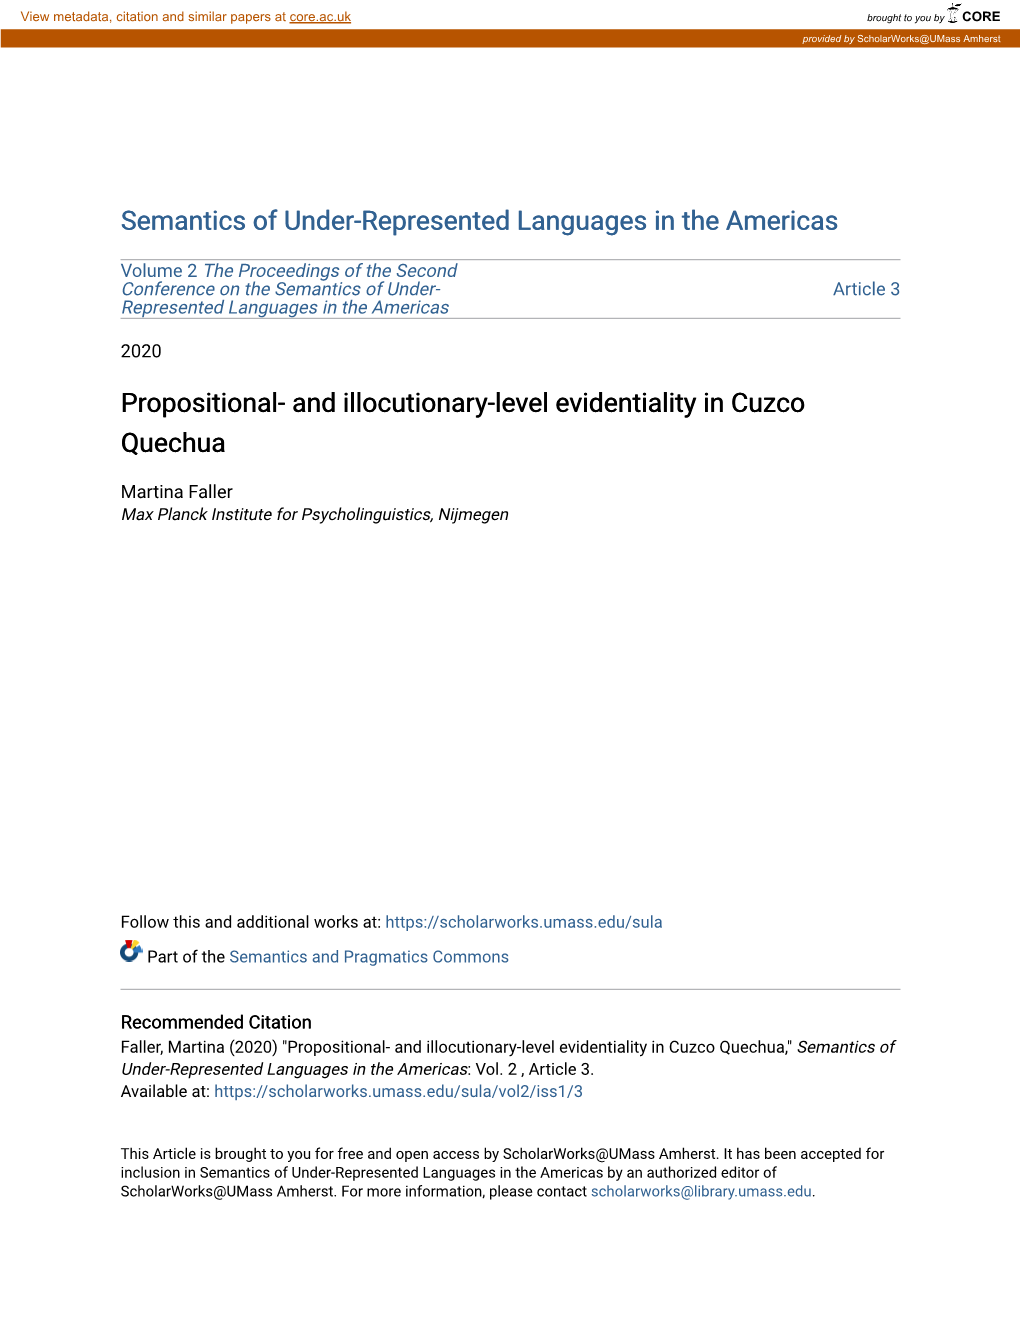 Propositional- and Illocutionary-Level Evidentiality in Cuzco Quechua